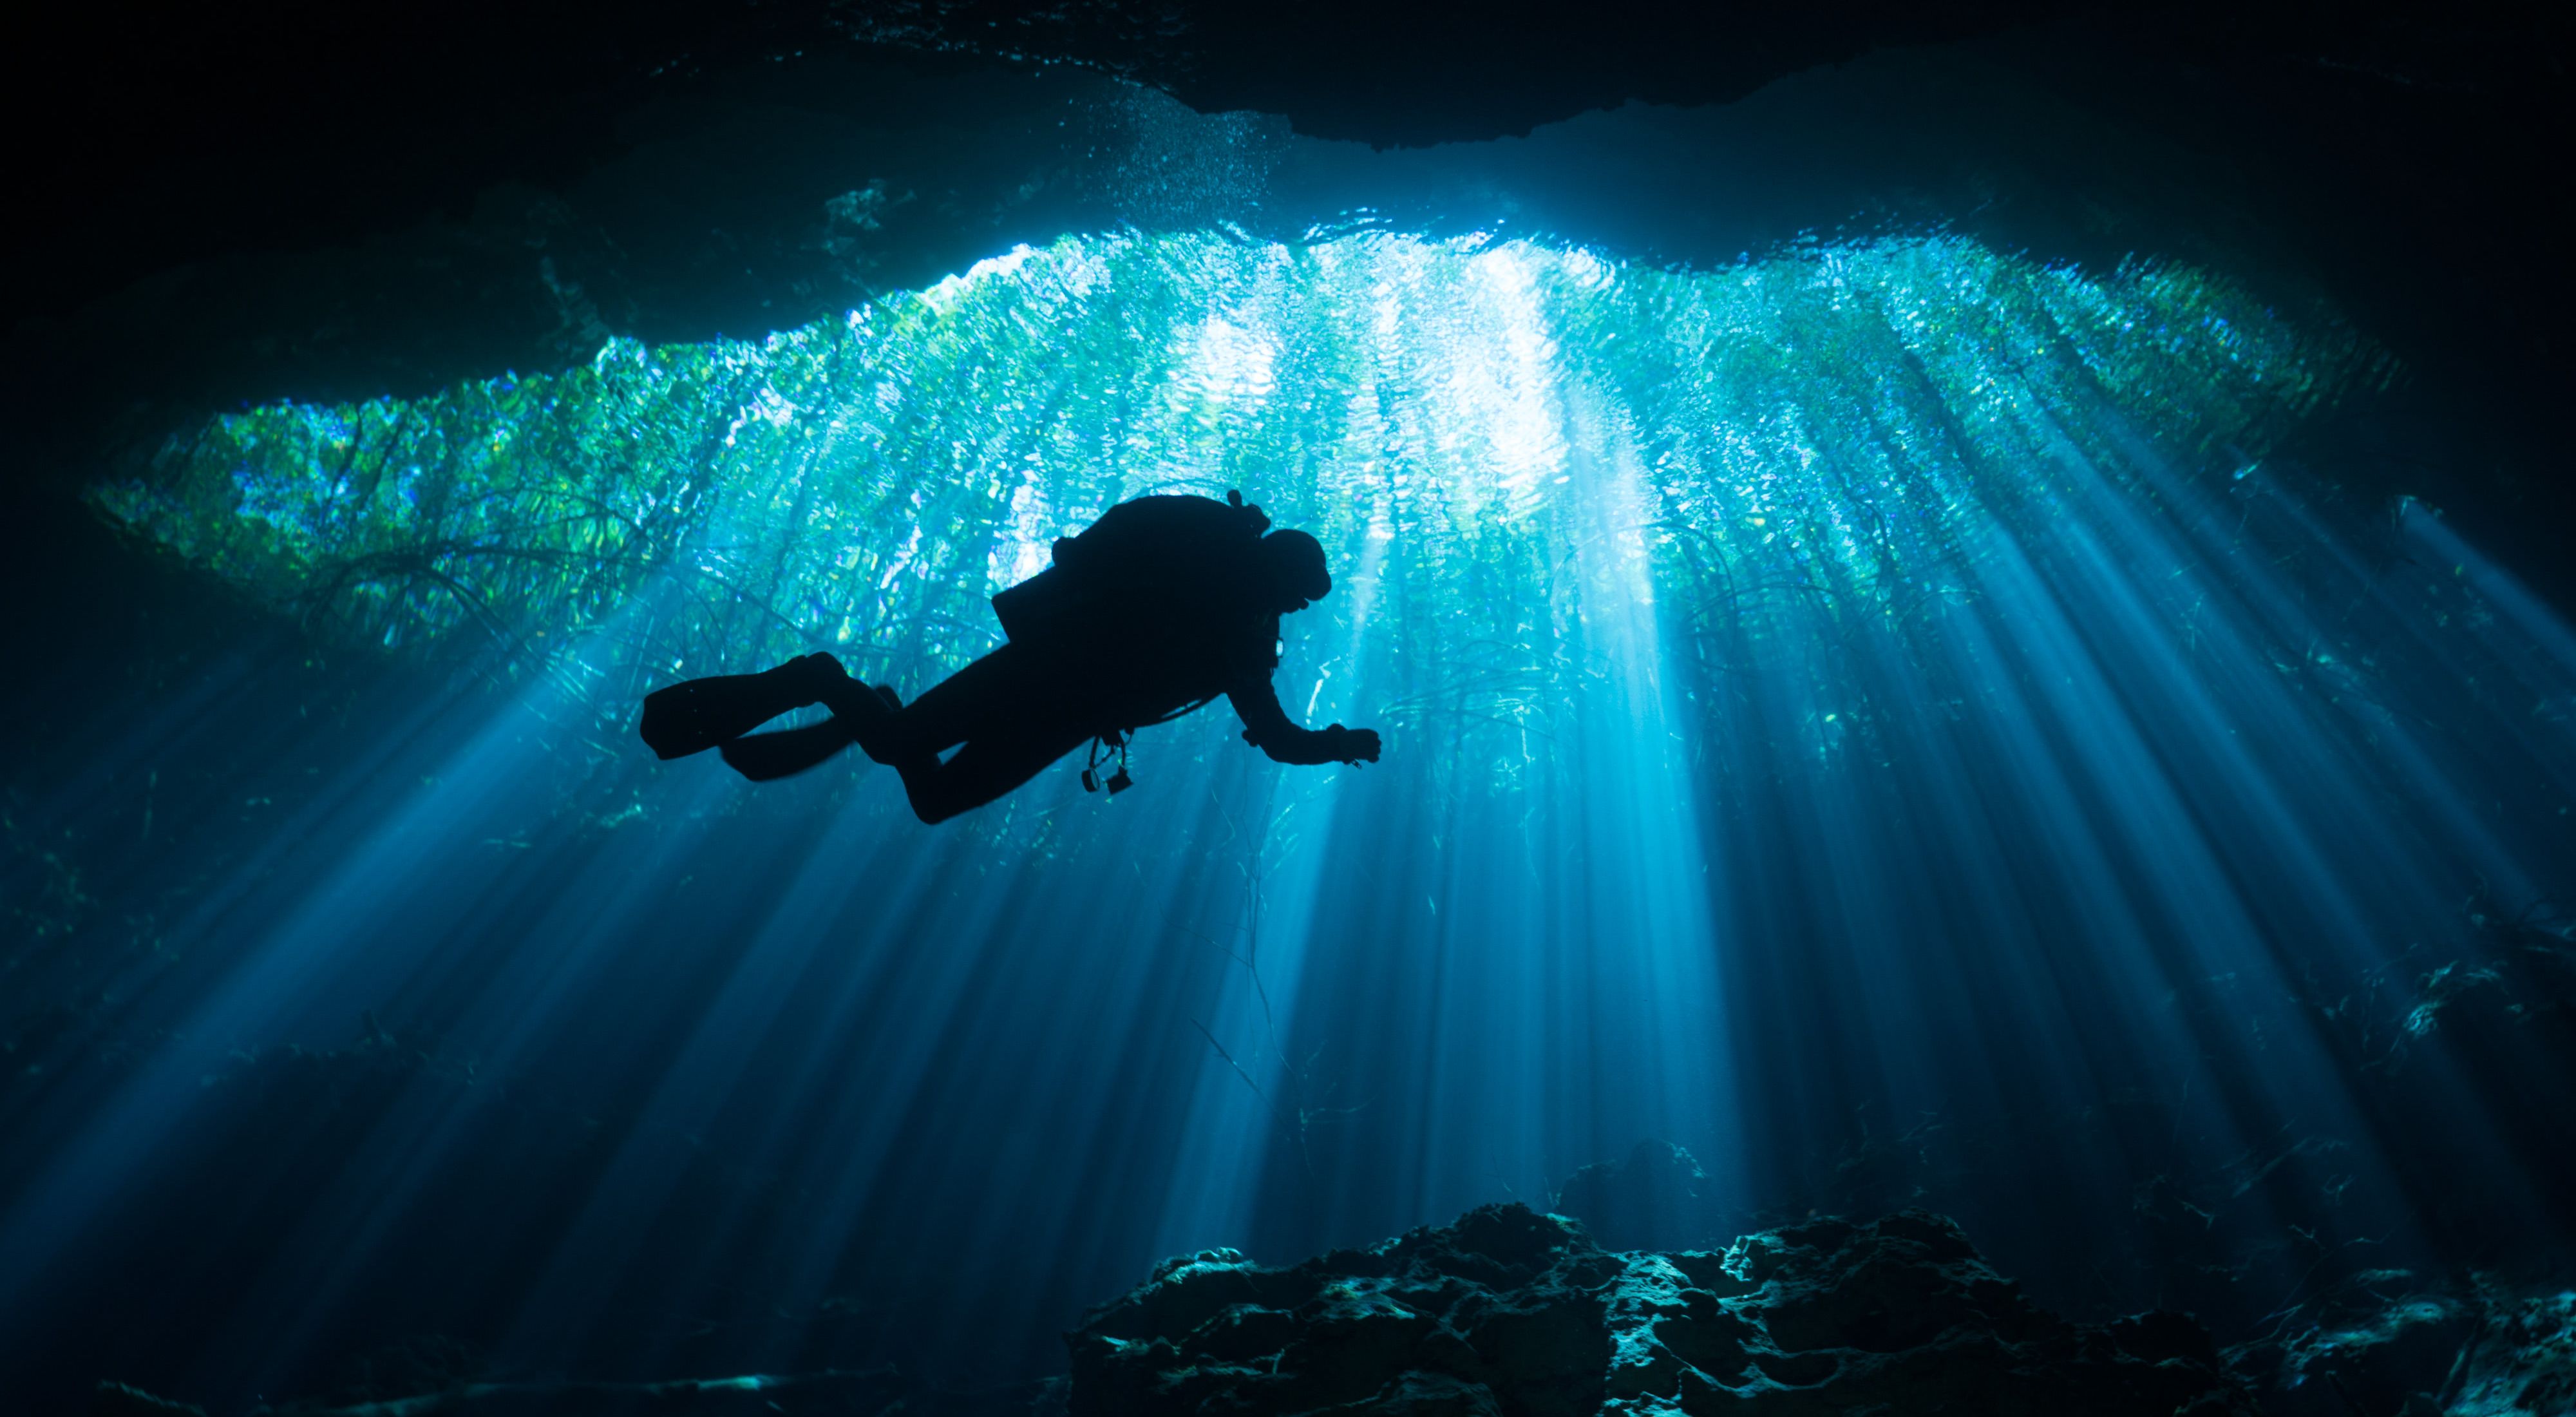 A scuba diver hovers amidst crisp light rays  shining through the trees down into Mexico's Yucatan cave system.  